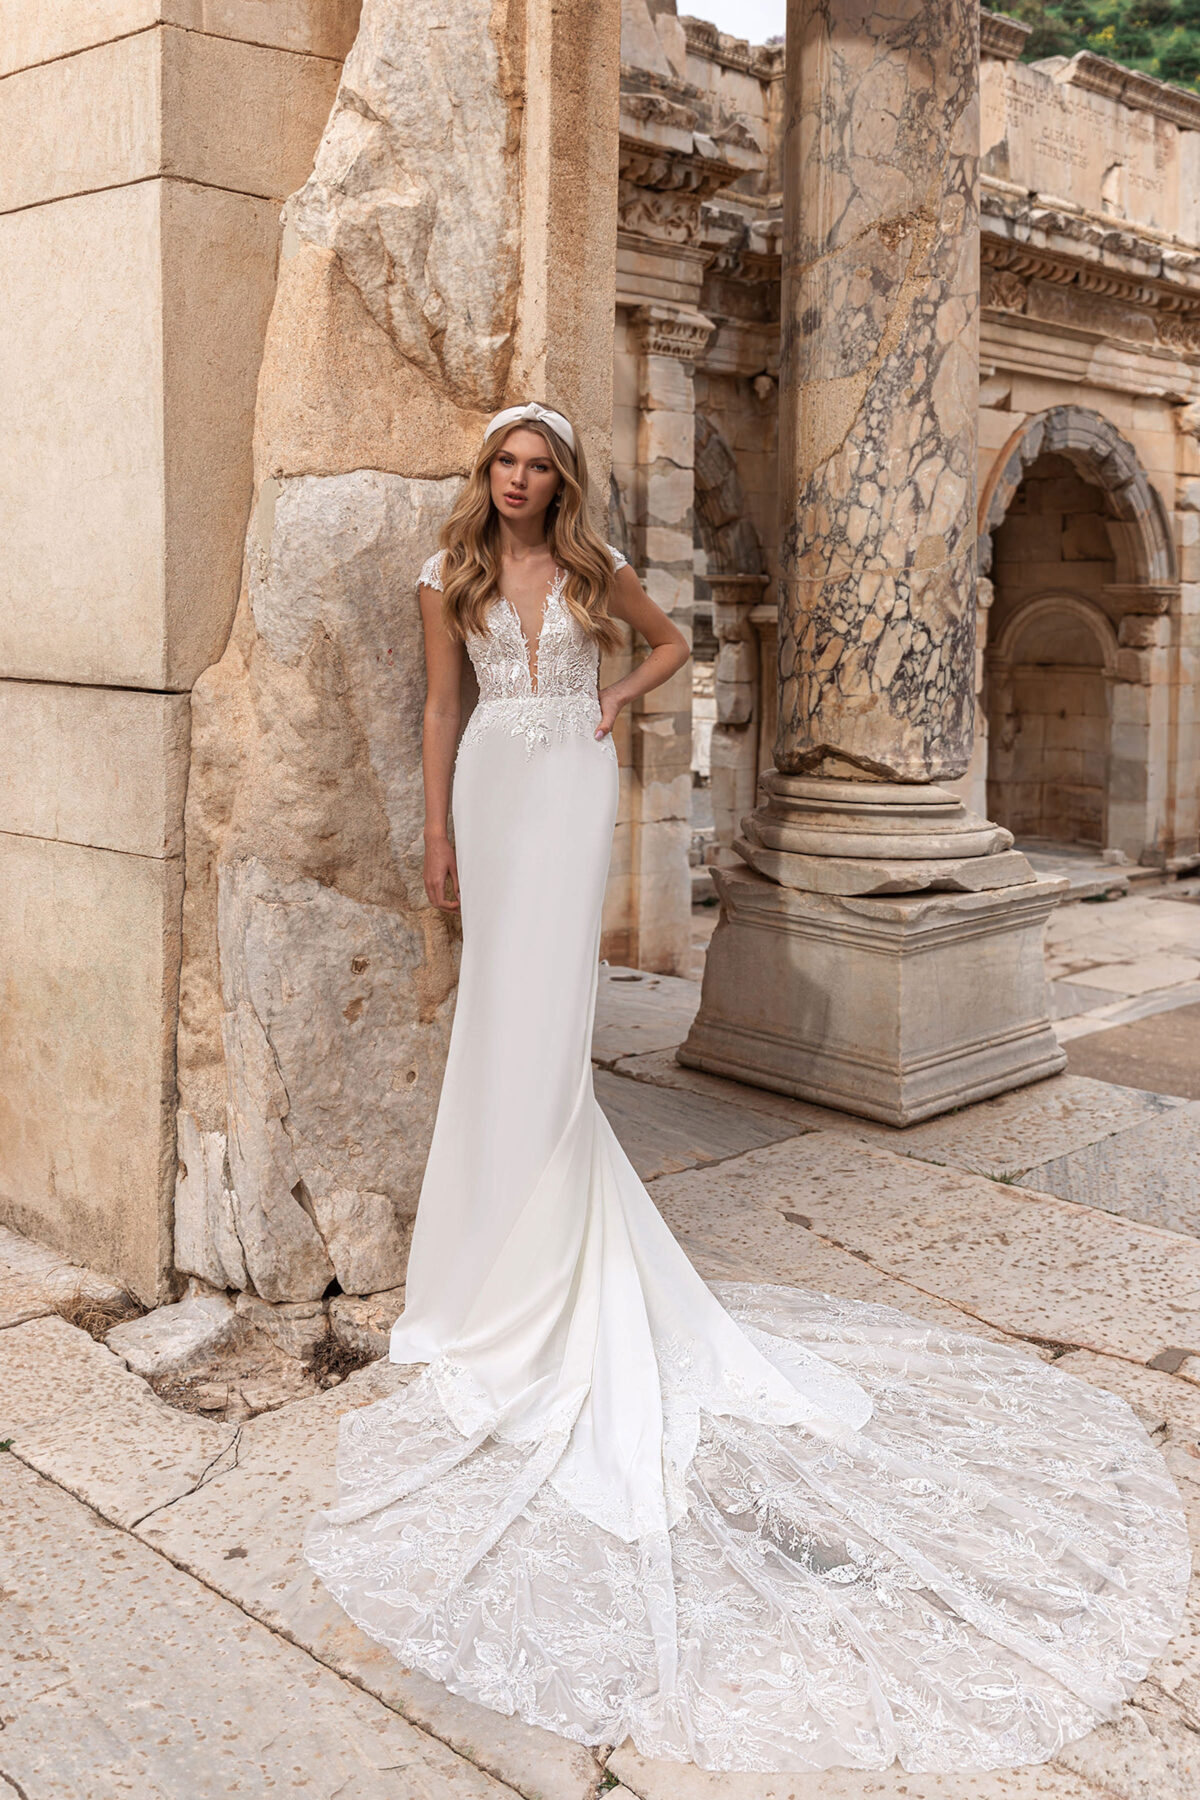 Sophie by Oliver Martino wedding dress